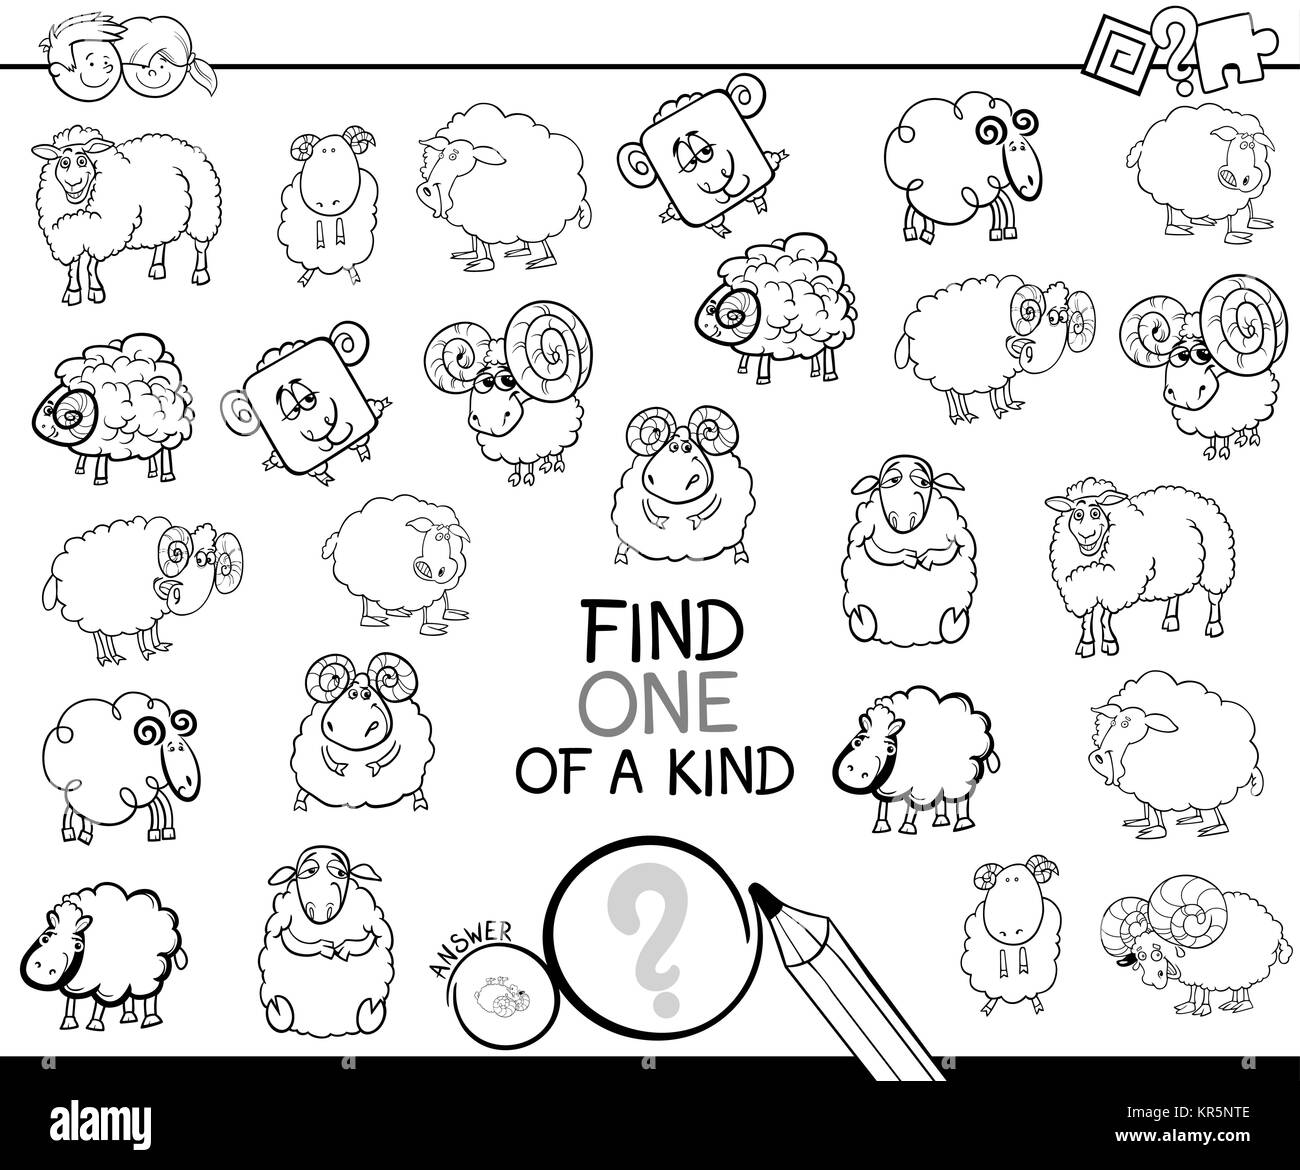 Black and White Cartoon Illustration of Find One of a Kind Picture Educational Activity Game for Children with Sheep Characters Coloring Book Stock Vector